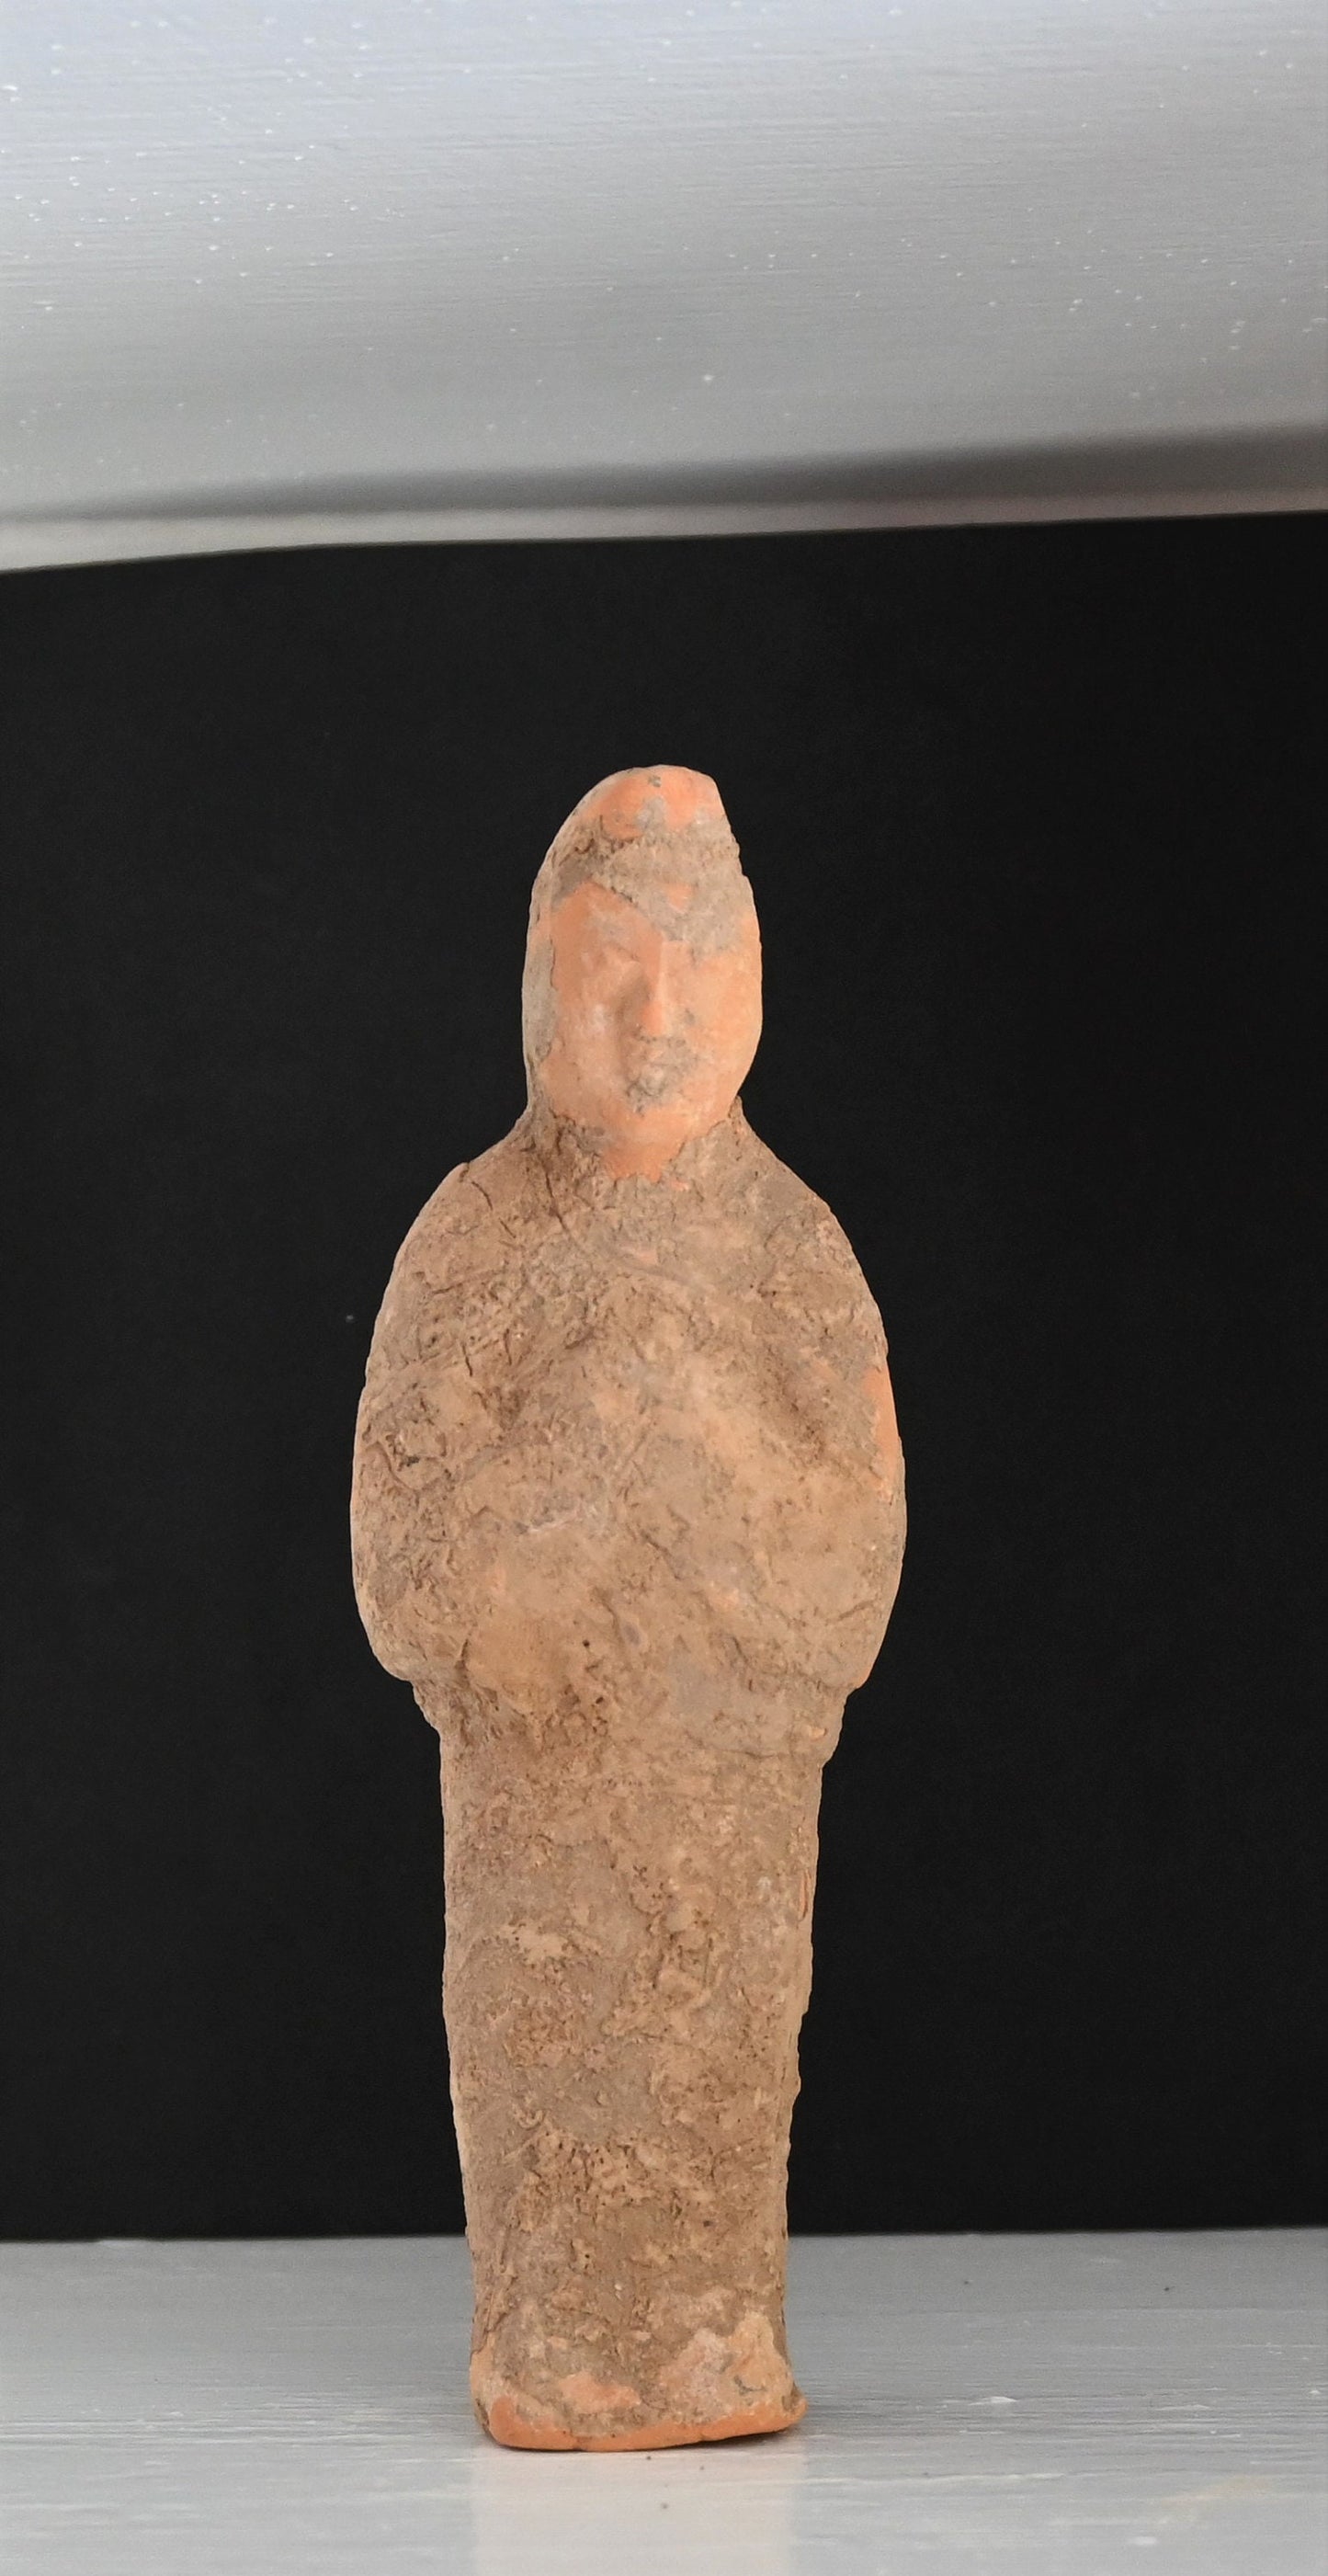 Authentic Han Dynasty, ca. 206 BCE to 220 CE mold-formed terracotta tomb attendant 6 7/8 inches with COA and provenance